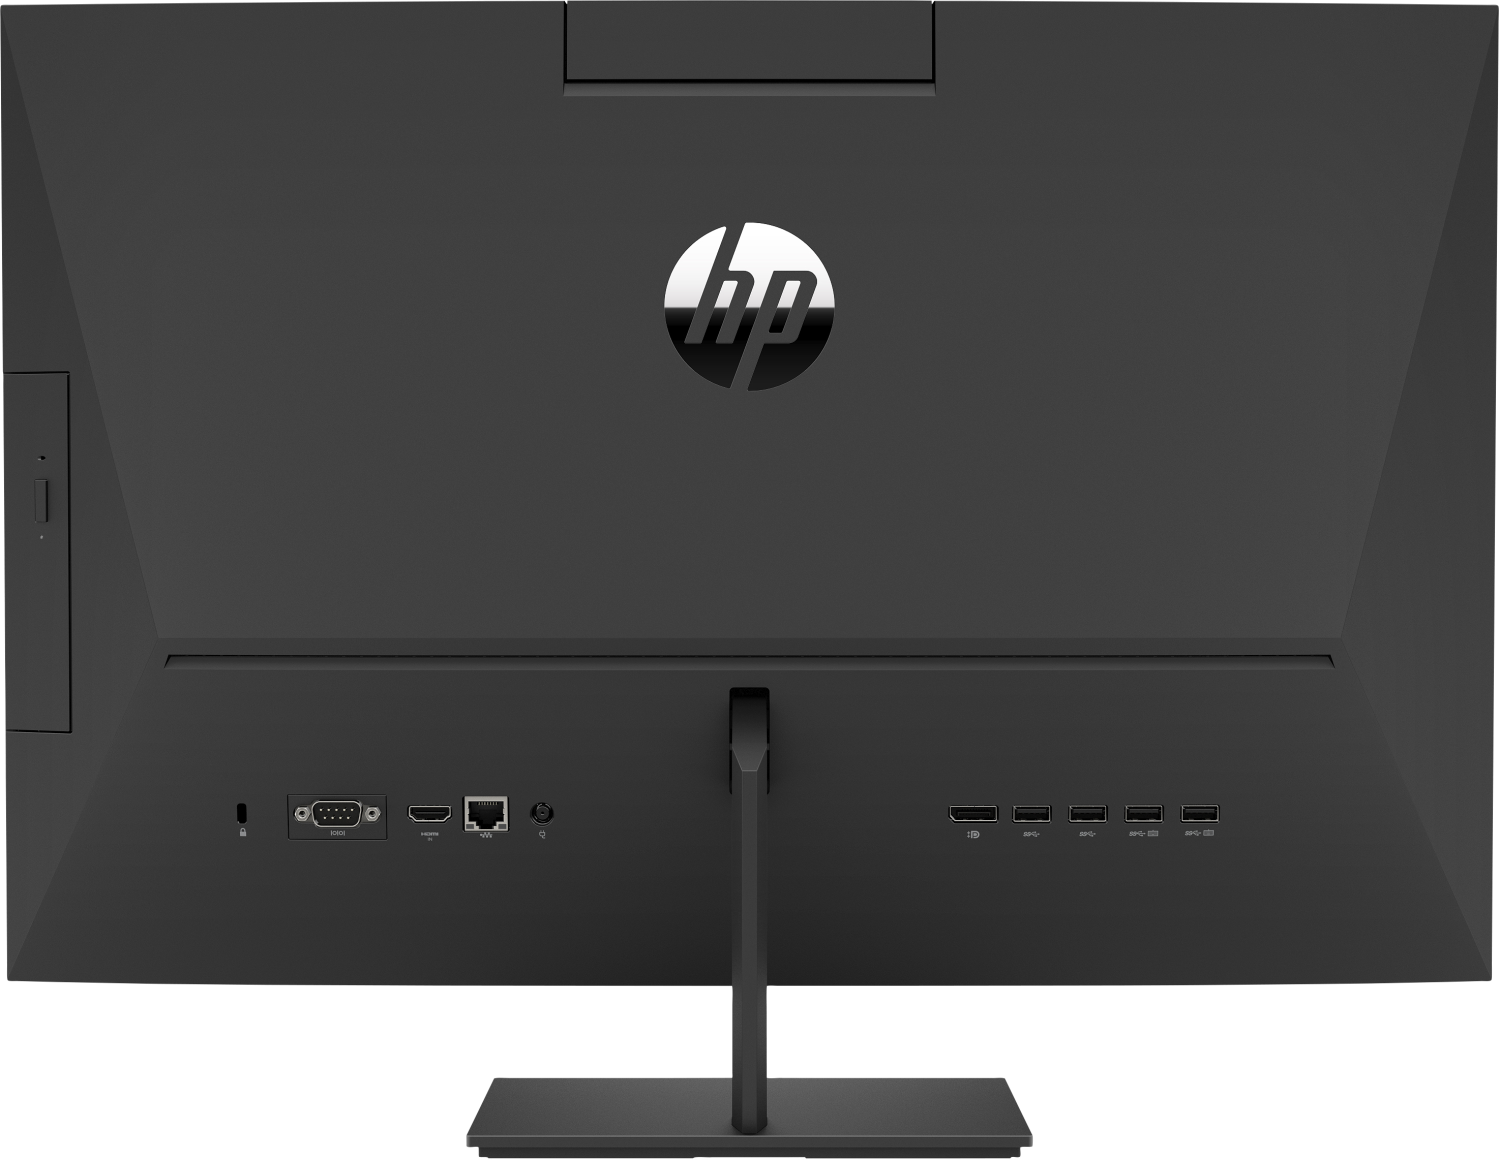 HP ProOne 440 G6 24 inch FHD/ NT / i5-10500T / 8GB / 256GB SSD / W10p64 / DVD-Writer / 1yw / 320K kbd / Opt Mouse / ProOne G6  Adjustable  Stand-AHS 23.8 / MCR / LBL TCO  Speakers / Intel Wi-Fi 6 / HDMI Port / Webcam / Sea and Rail